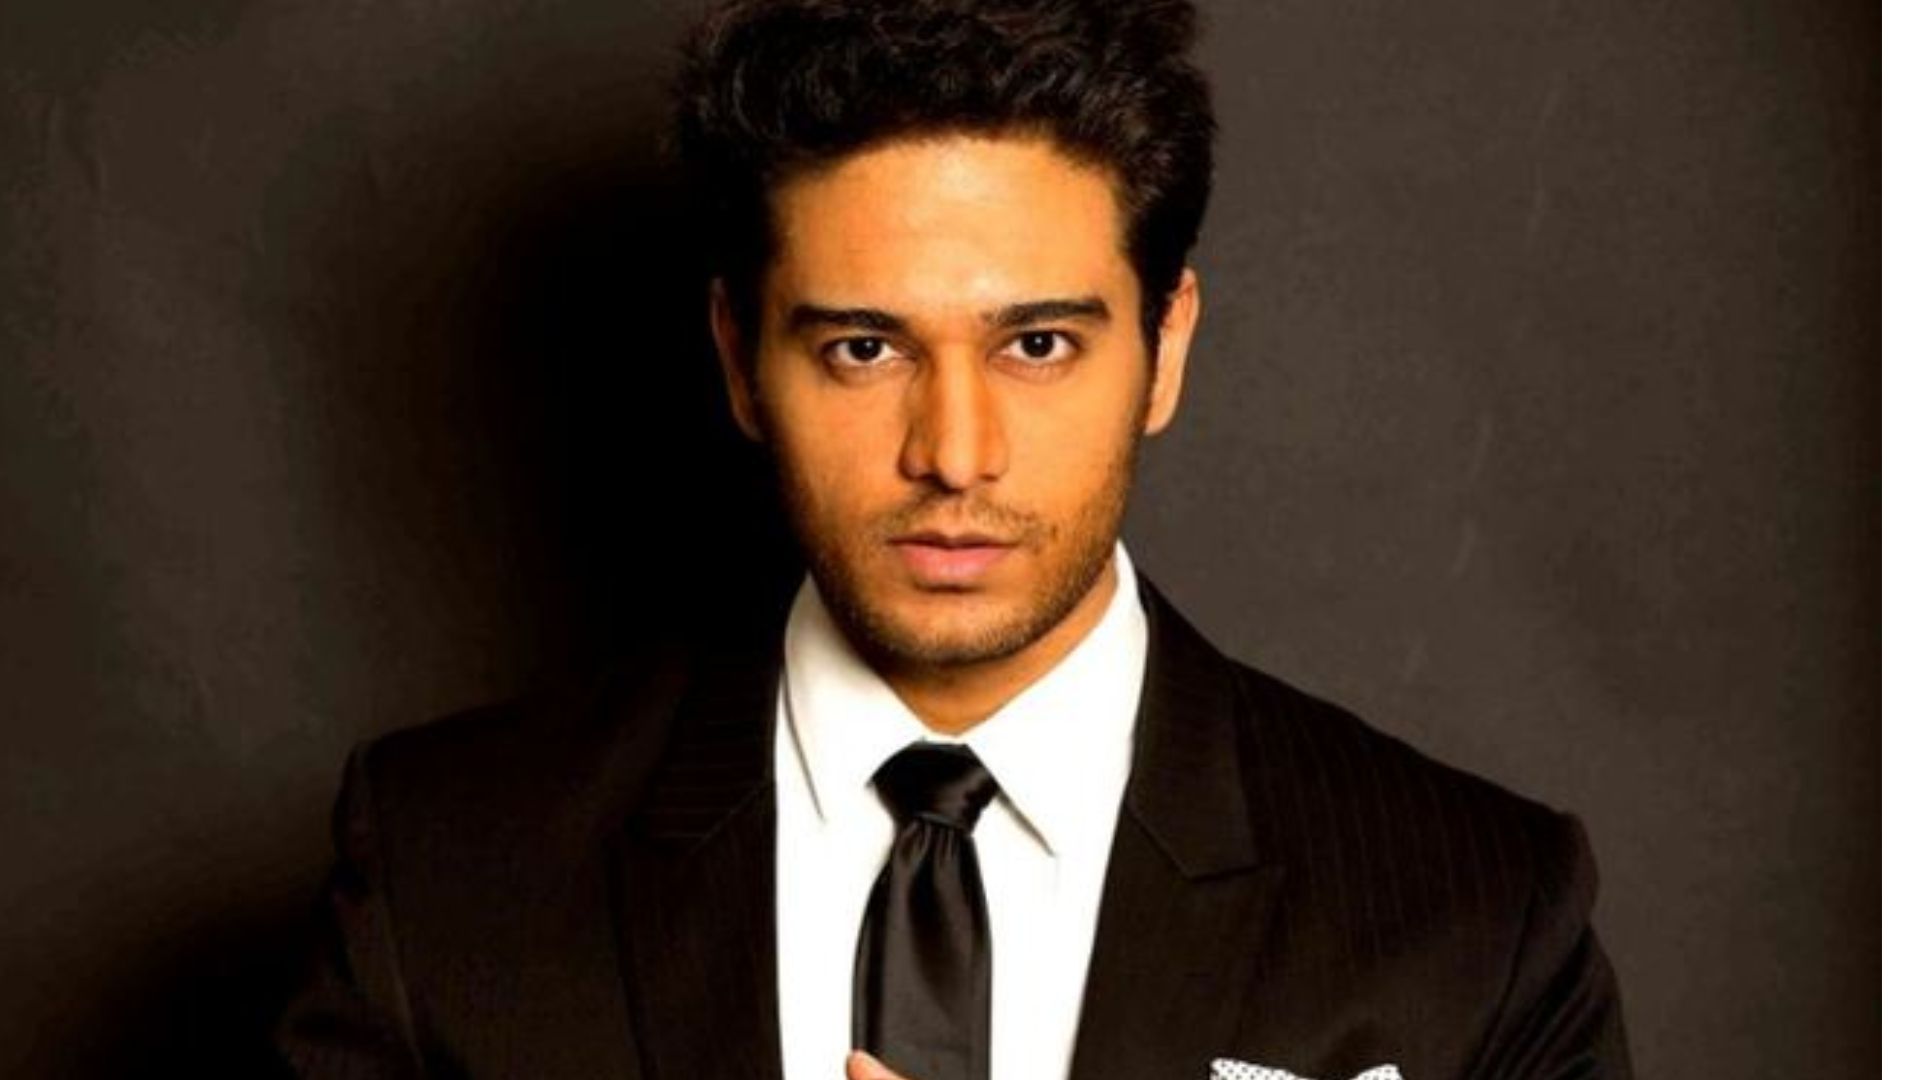 Gaurav Khanna - Known For His Roles Of Neil In Jeevan Saathi, Inspector Kavin In CID